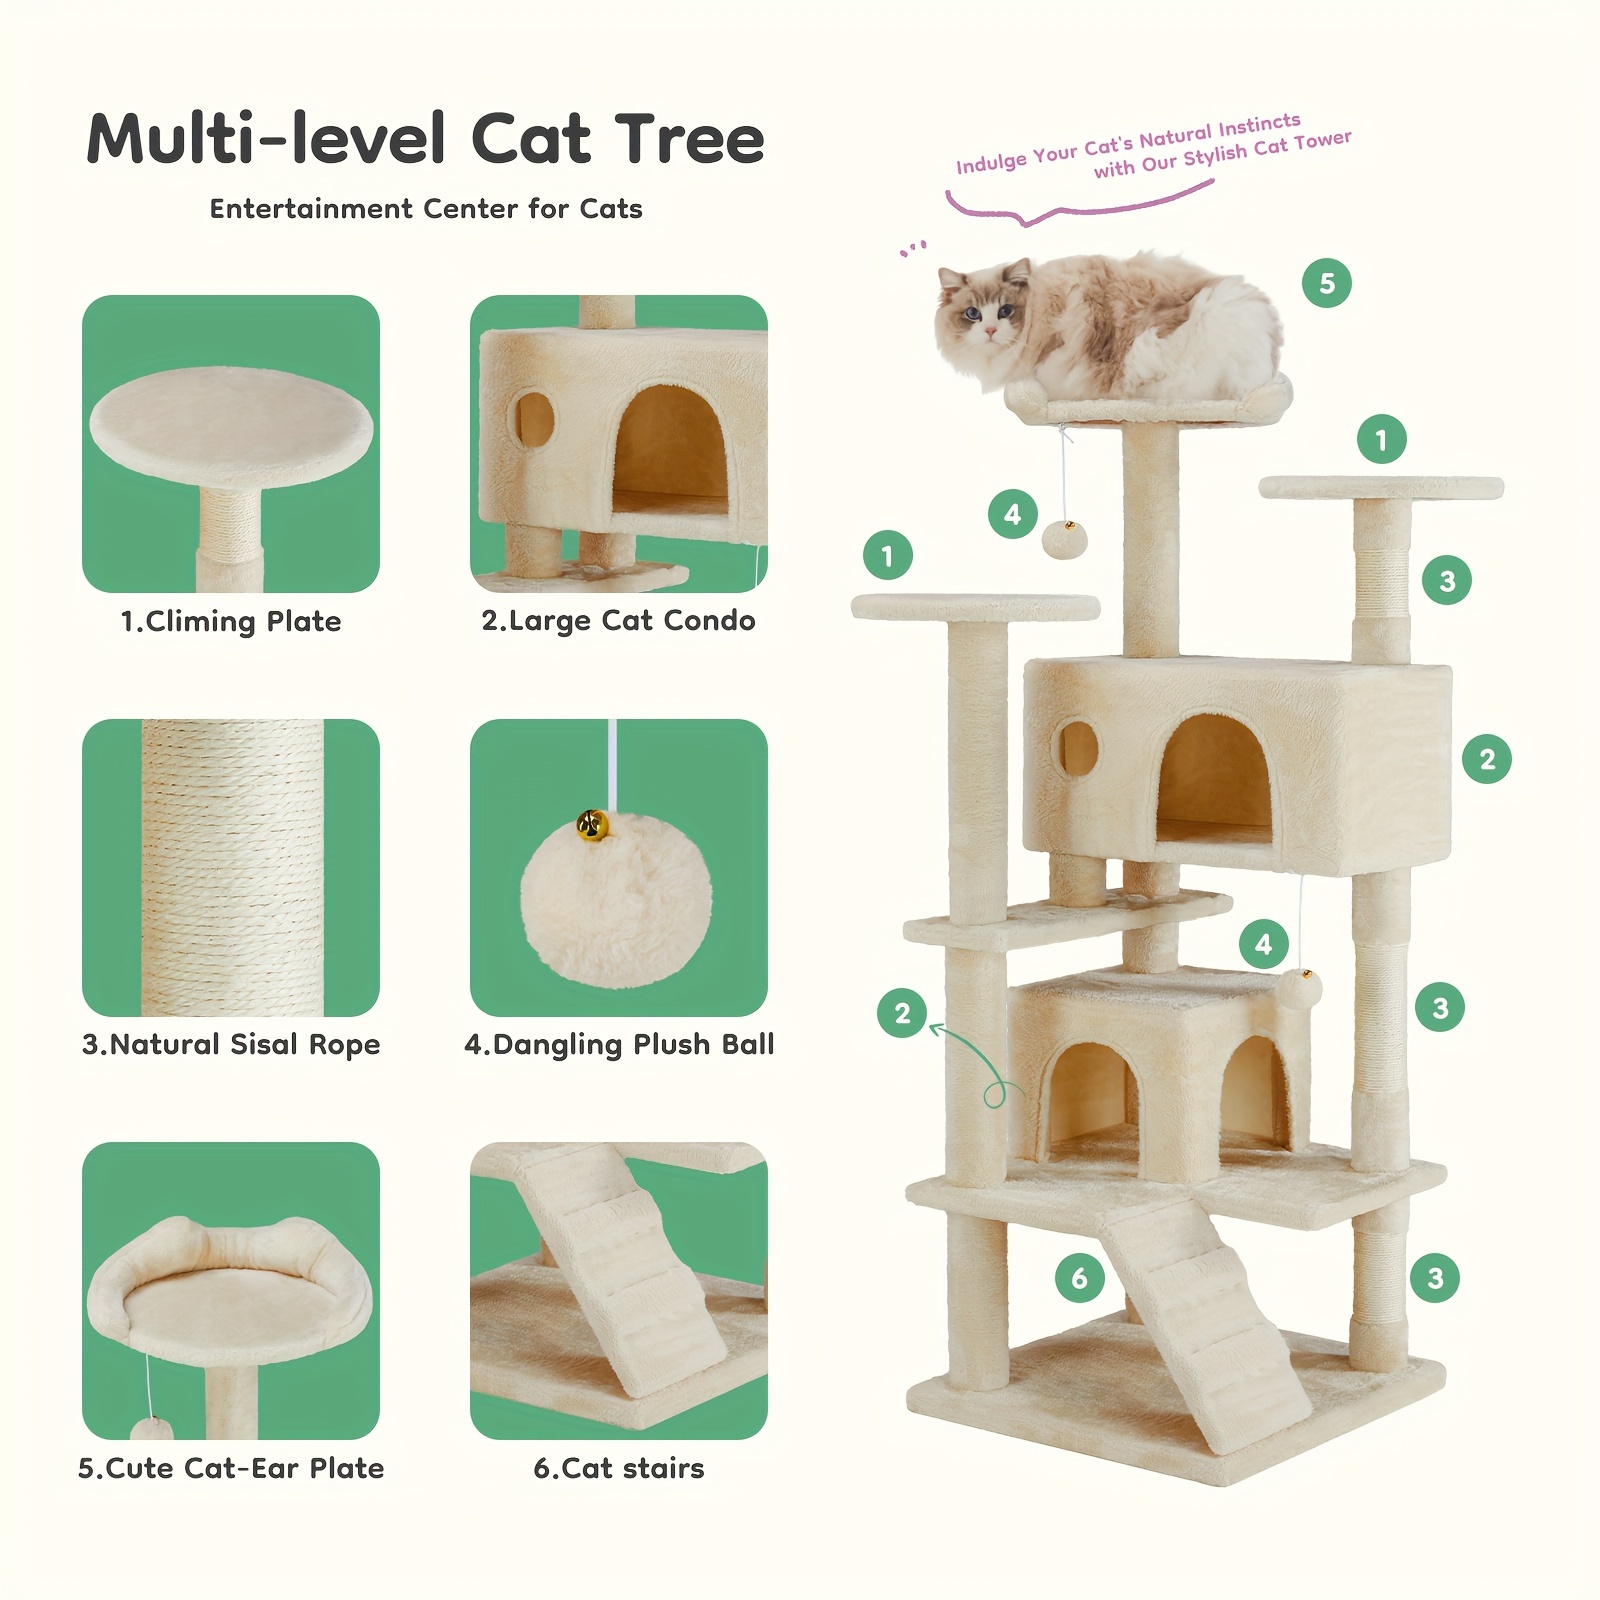 

Dumos, 1pc Cat Tree, Indoor Cats Tree Tower, 54in Multi-level Cat Tree, House Condo, Sisal Scratching Post, 2 Large Cave, Climbing Plate, Plush Ball